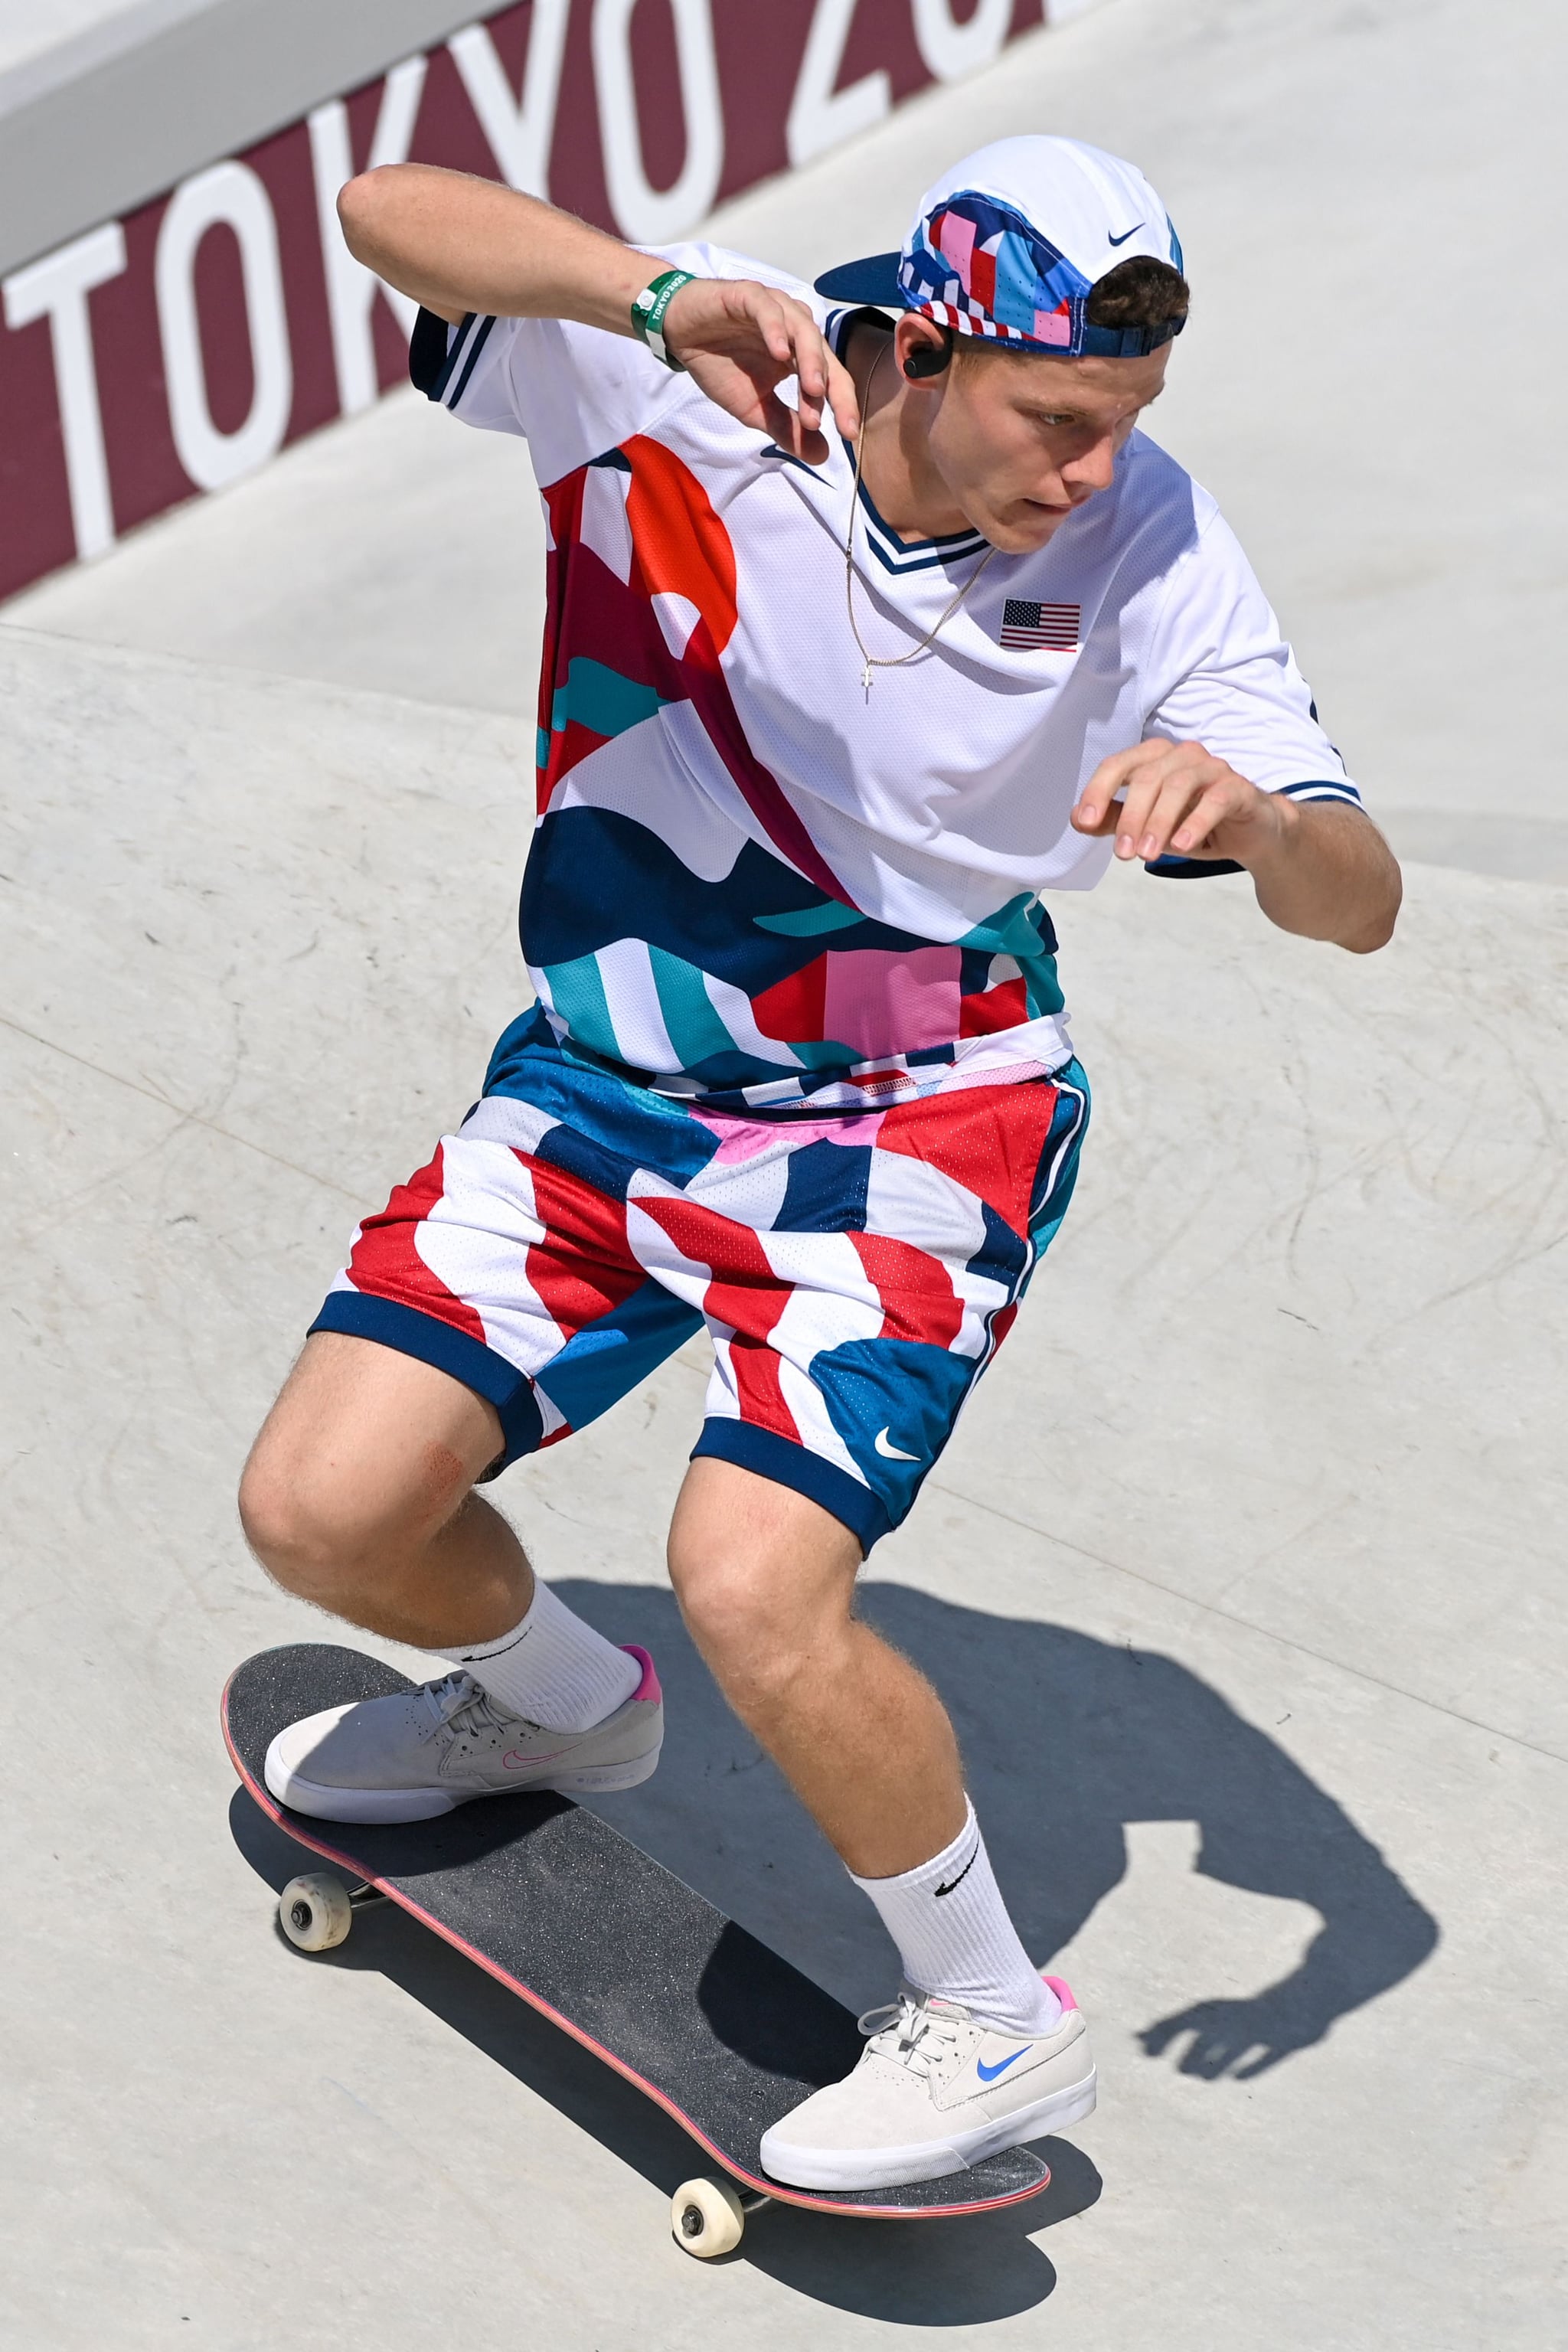 The Skateboarders at the Tokyo Olympics 